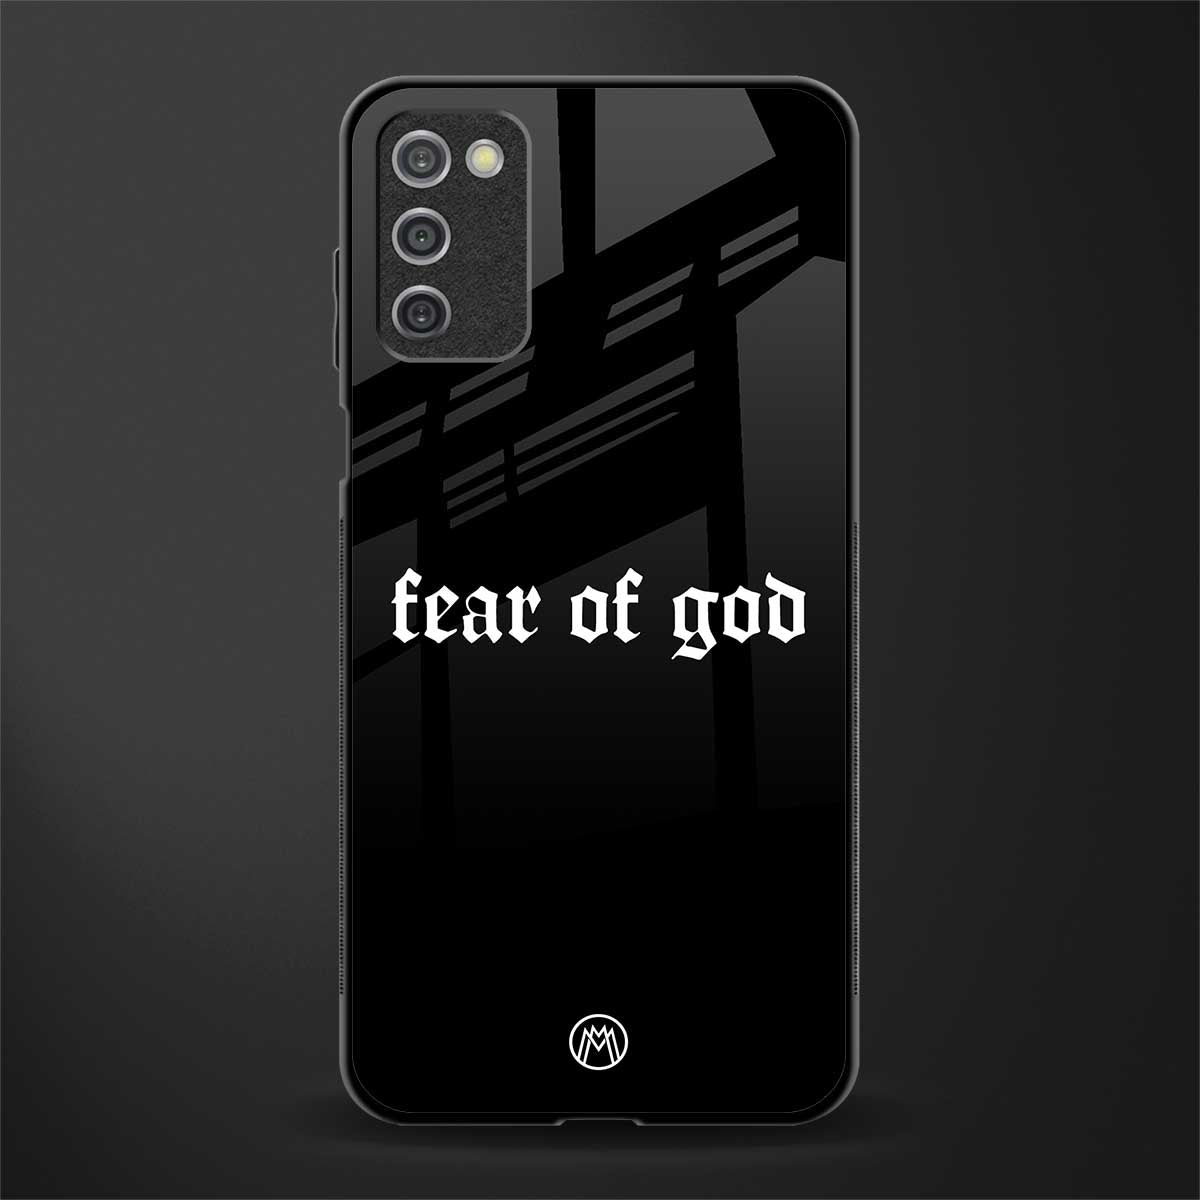 fear of god phone cover for samsung galaxy a03s